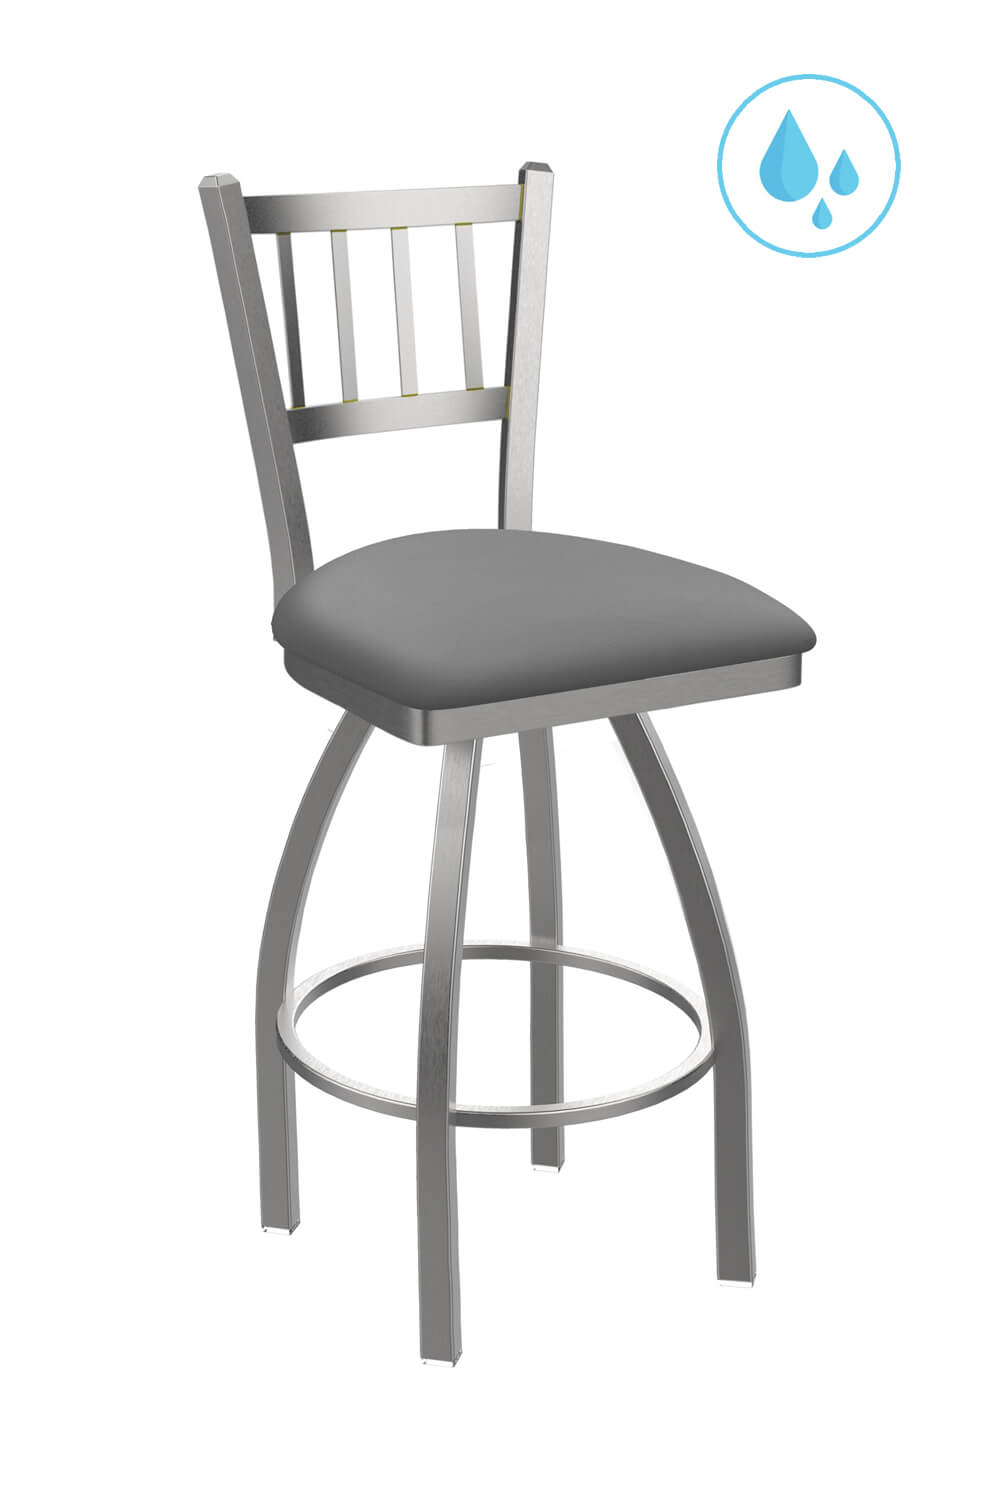 Contessa Outdoor Swivel Bar Stool with Mission Back #810